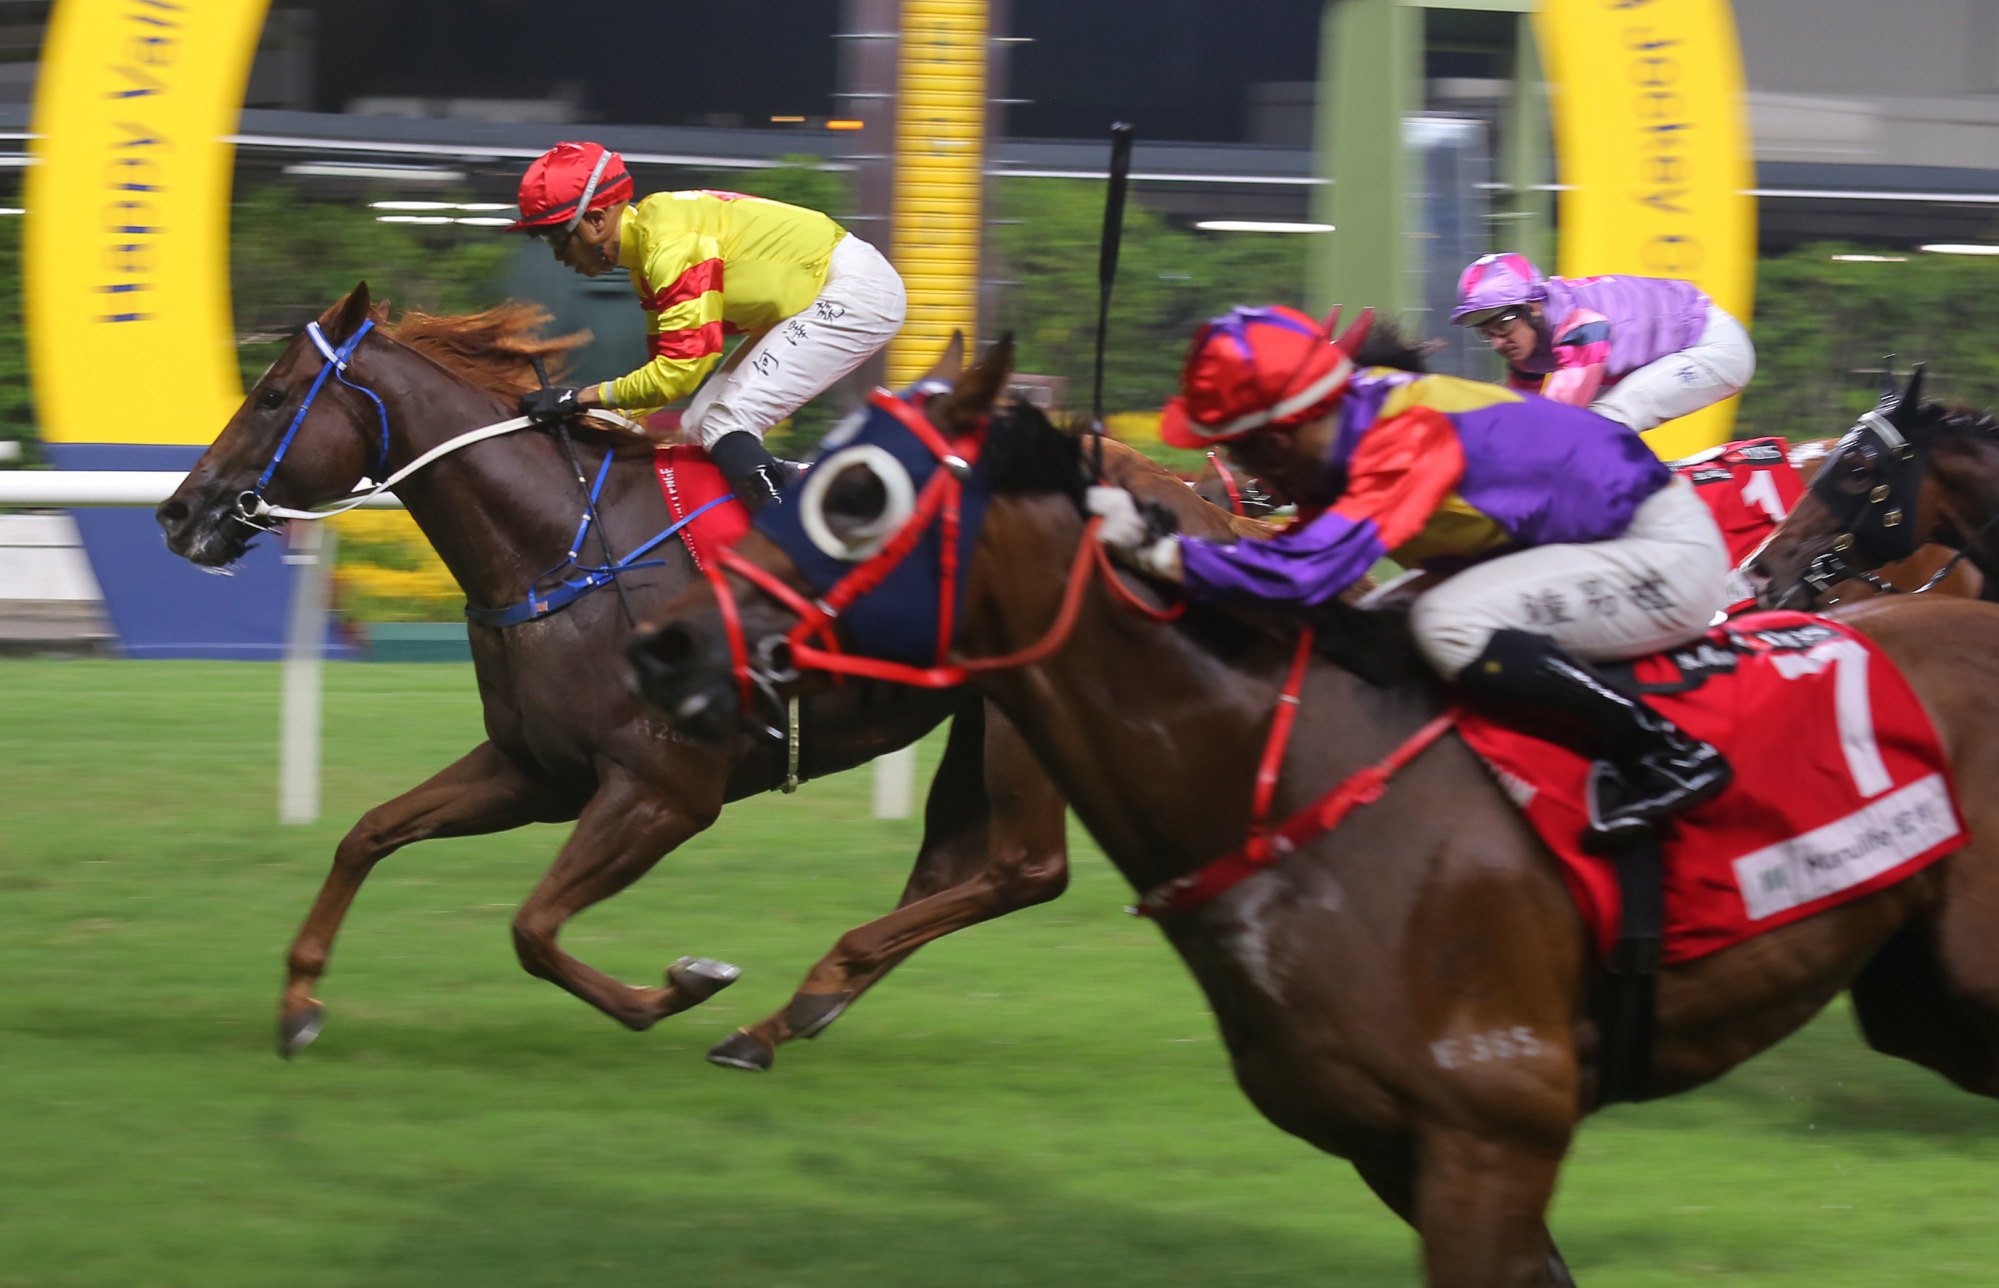 Capital Delight (yellow) ties with Lucky Archangel (purple) for first place at Happy Valley on October 4.